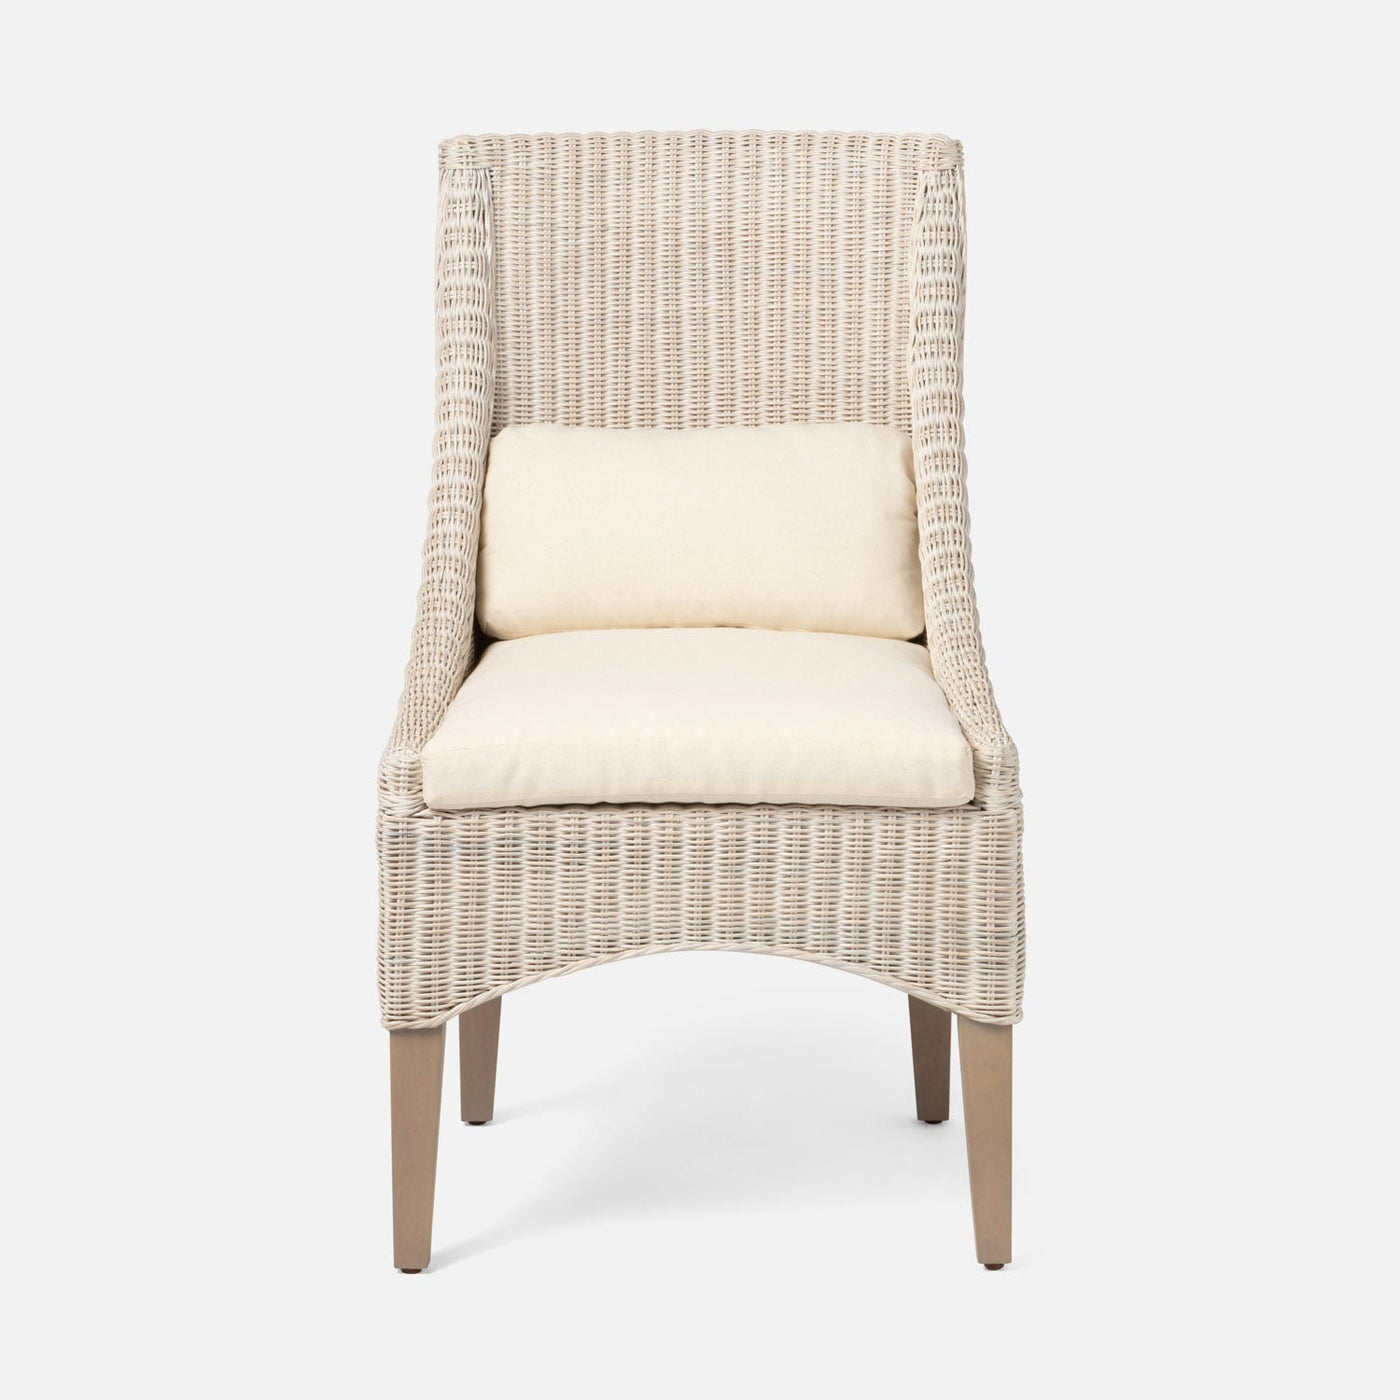 CHAIR DINING WHITE WICKER